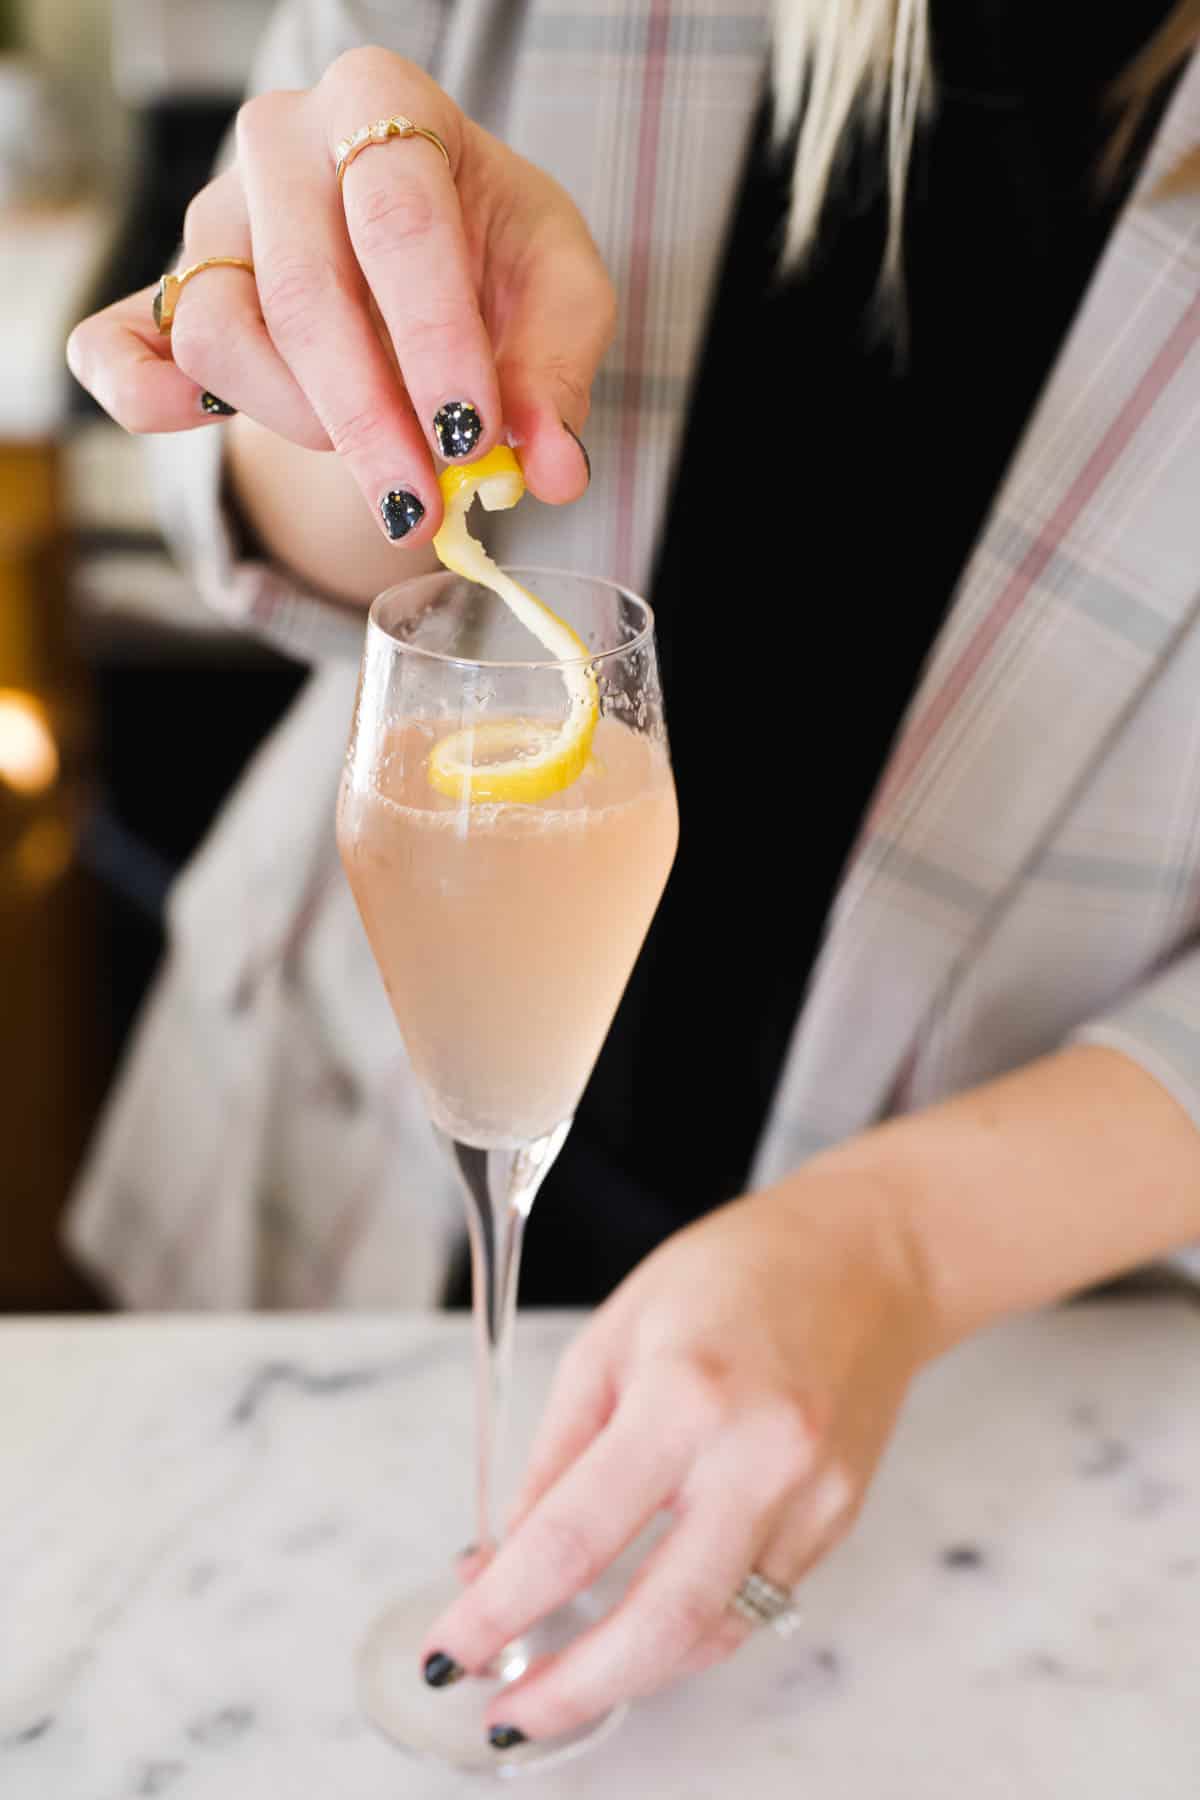 Woman adding a lemon twist to a pink champagne cocktail in a champagne flute.